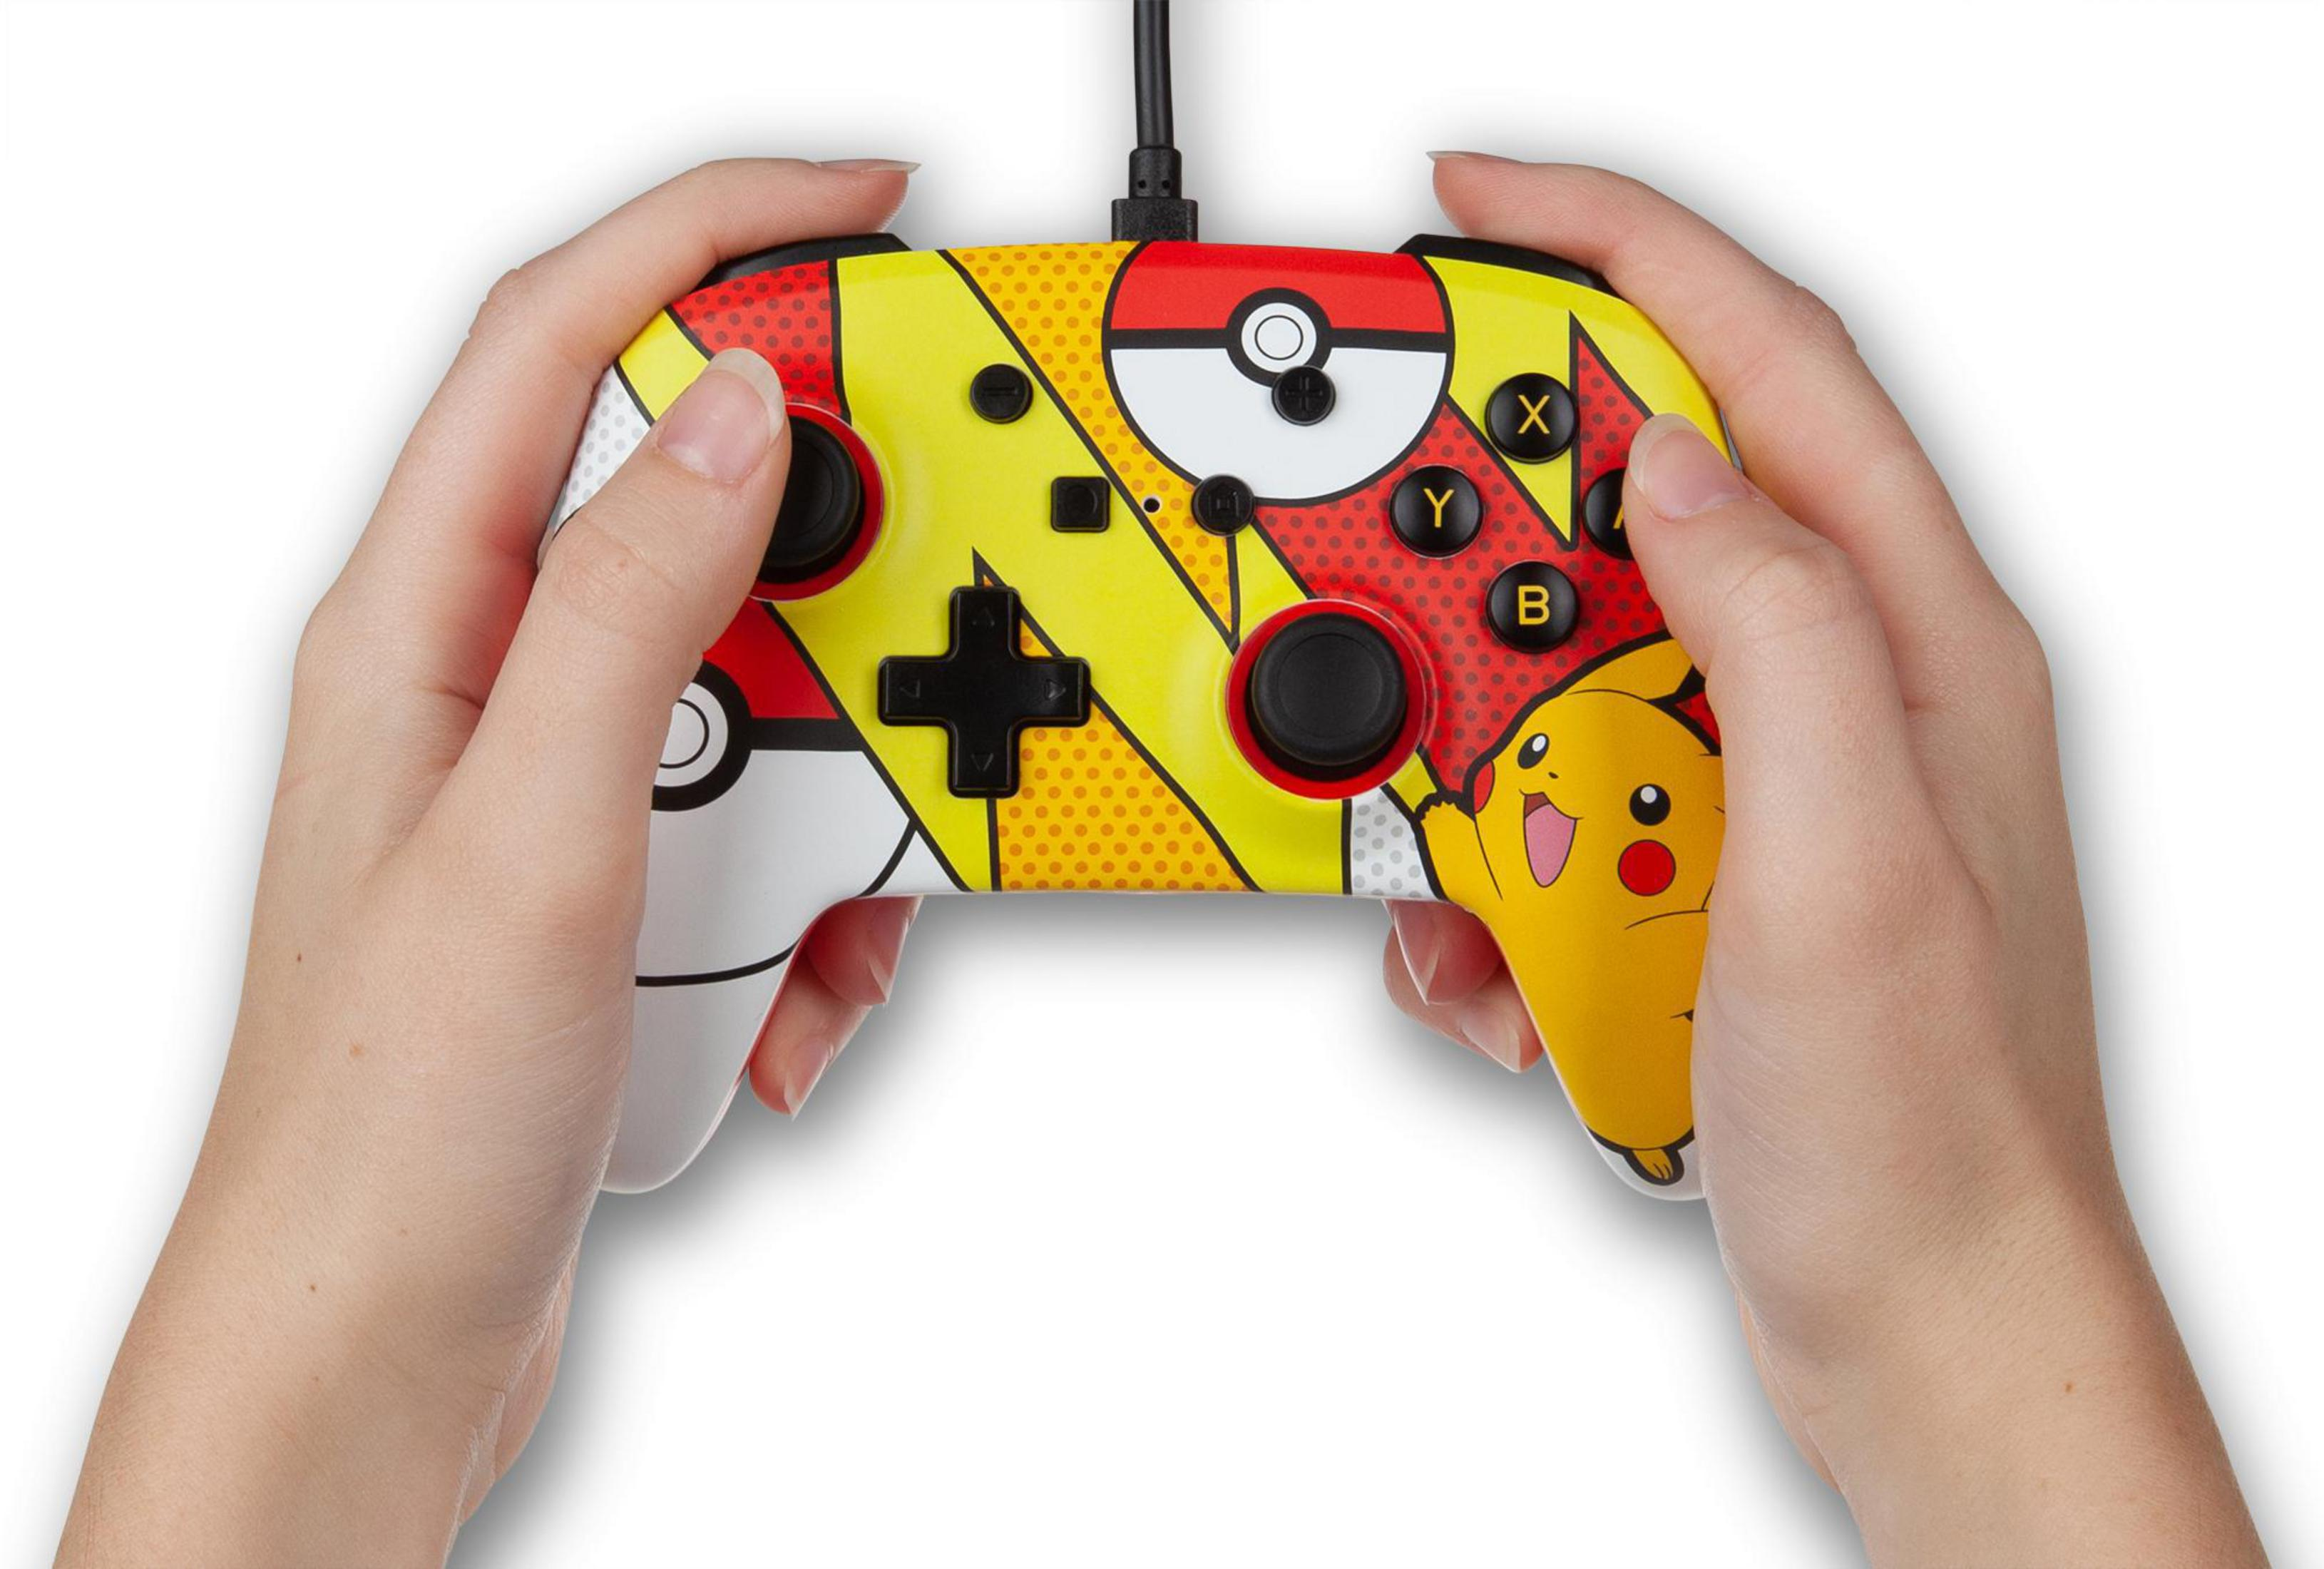 PIKACHU A CONTROLLER POPART Controller PA1518905-01 NSW Rot/Gelb WIRED POWER